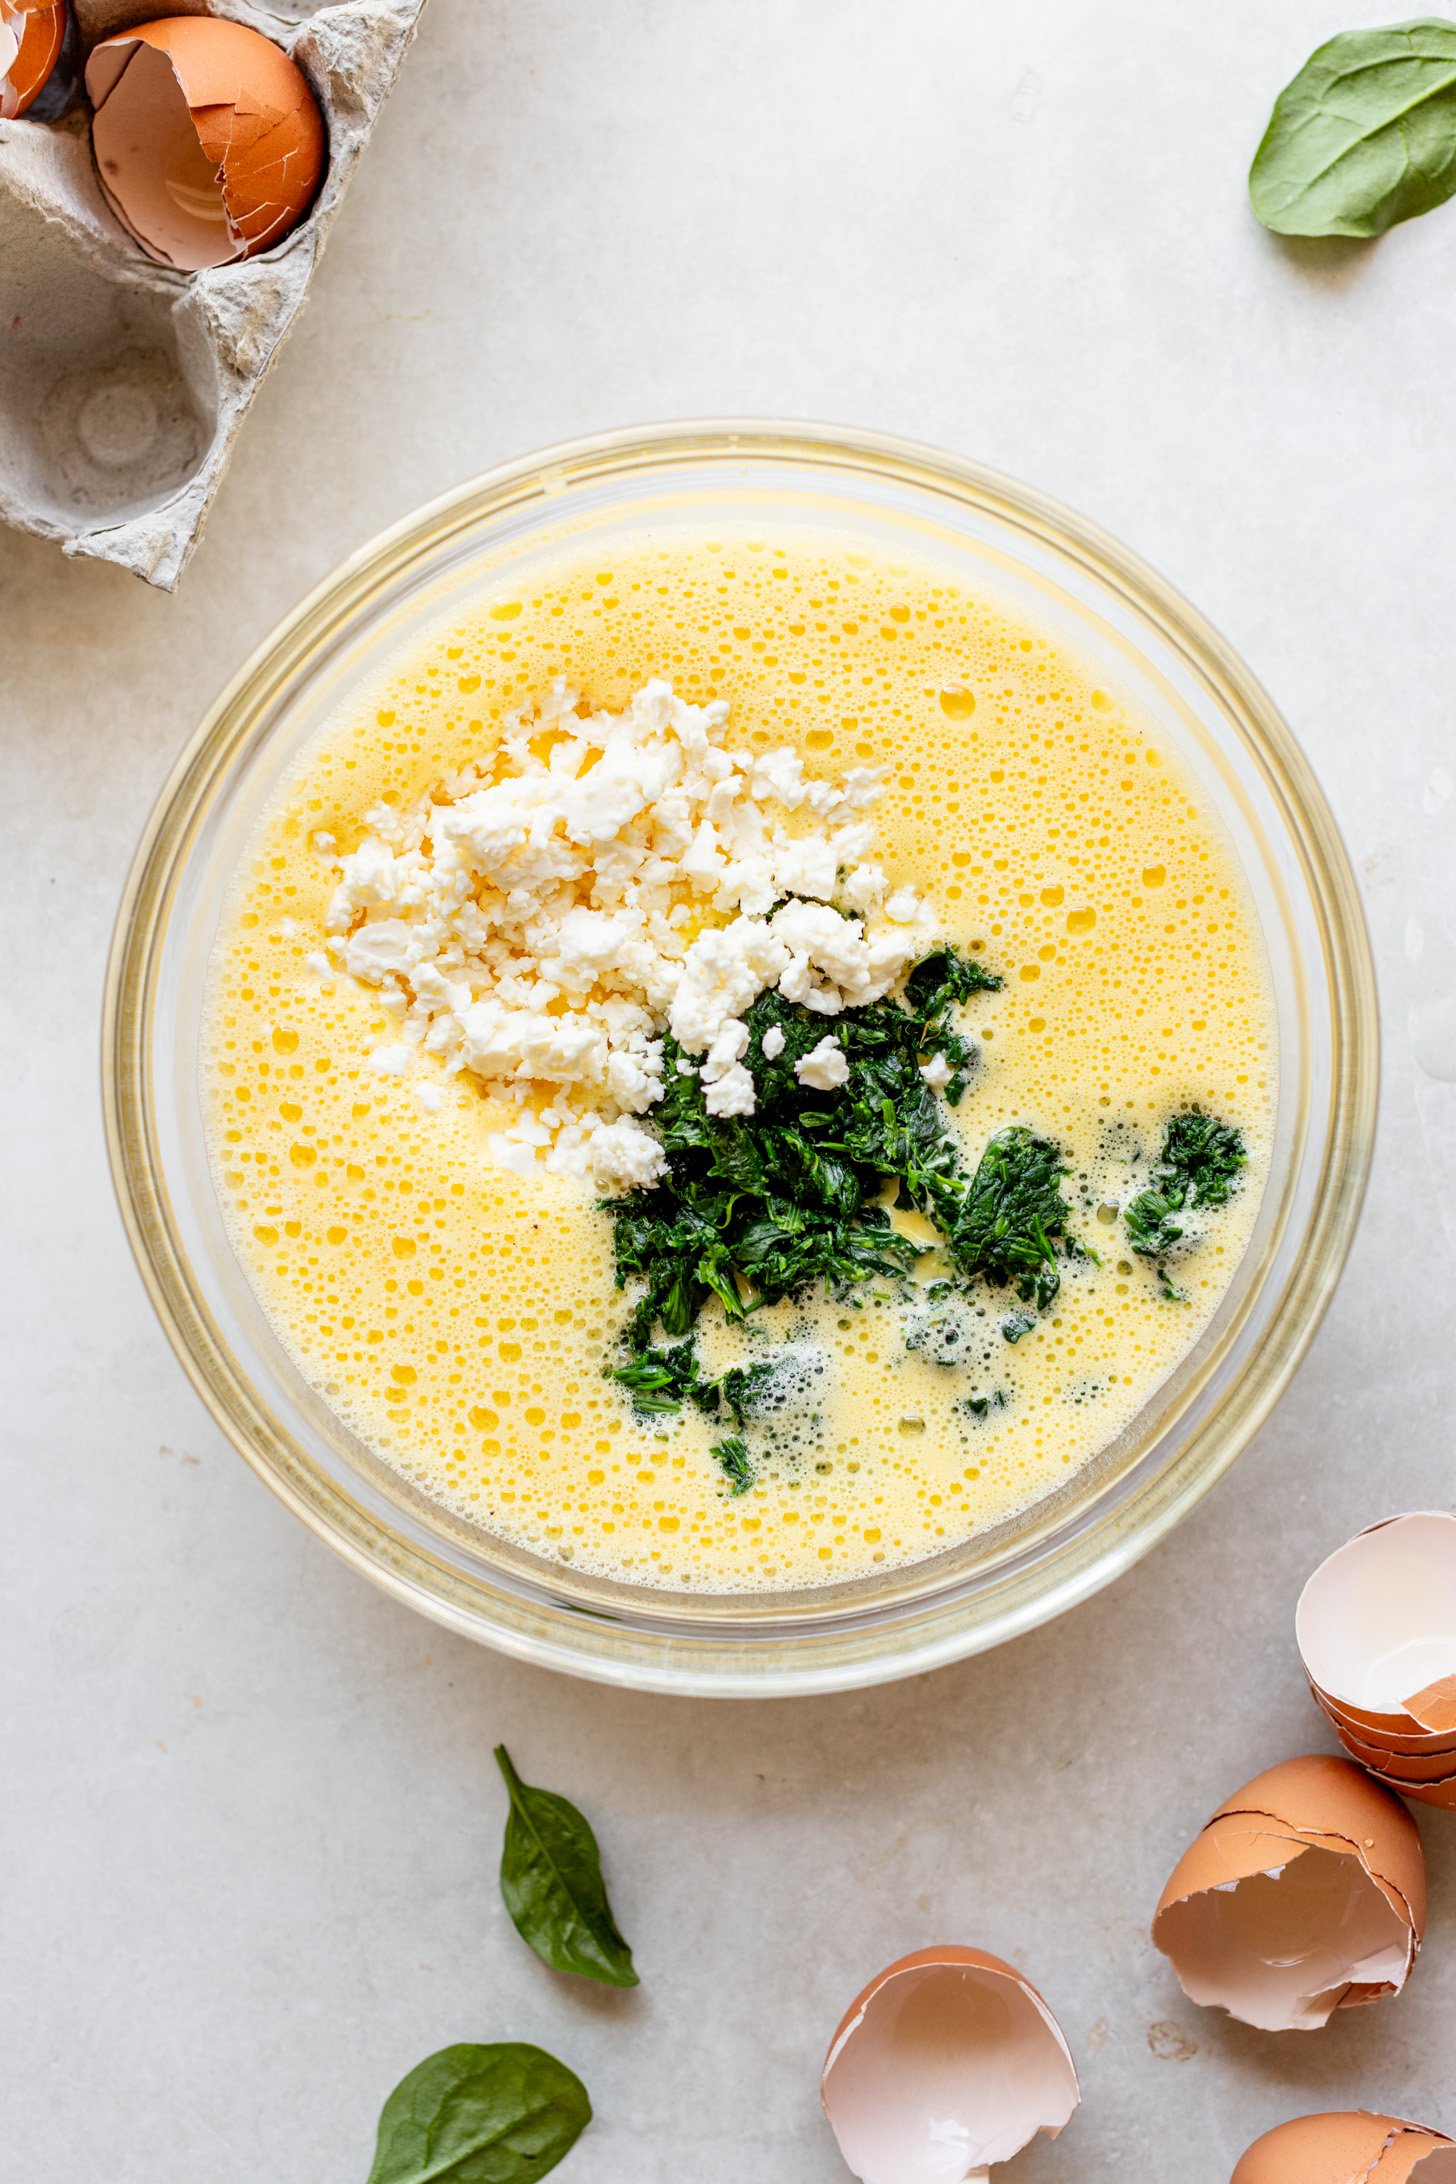 A bowl with pureed egg + cottage cheese mixture. There is feta cheese and spinach on top, but not yet stirred in. There are egg shells and spinach leaves on the table next to the bowl.